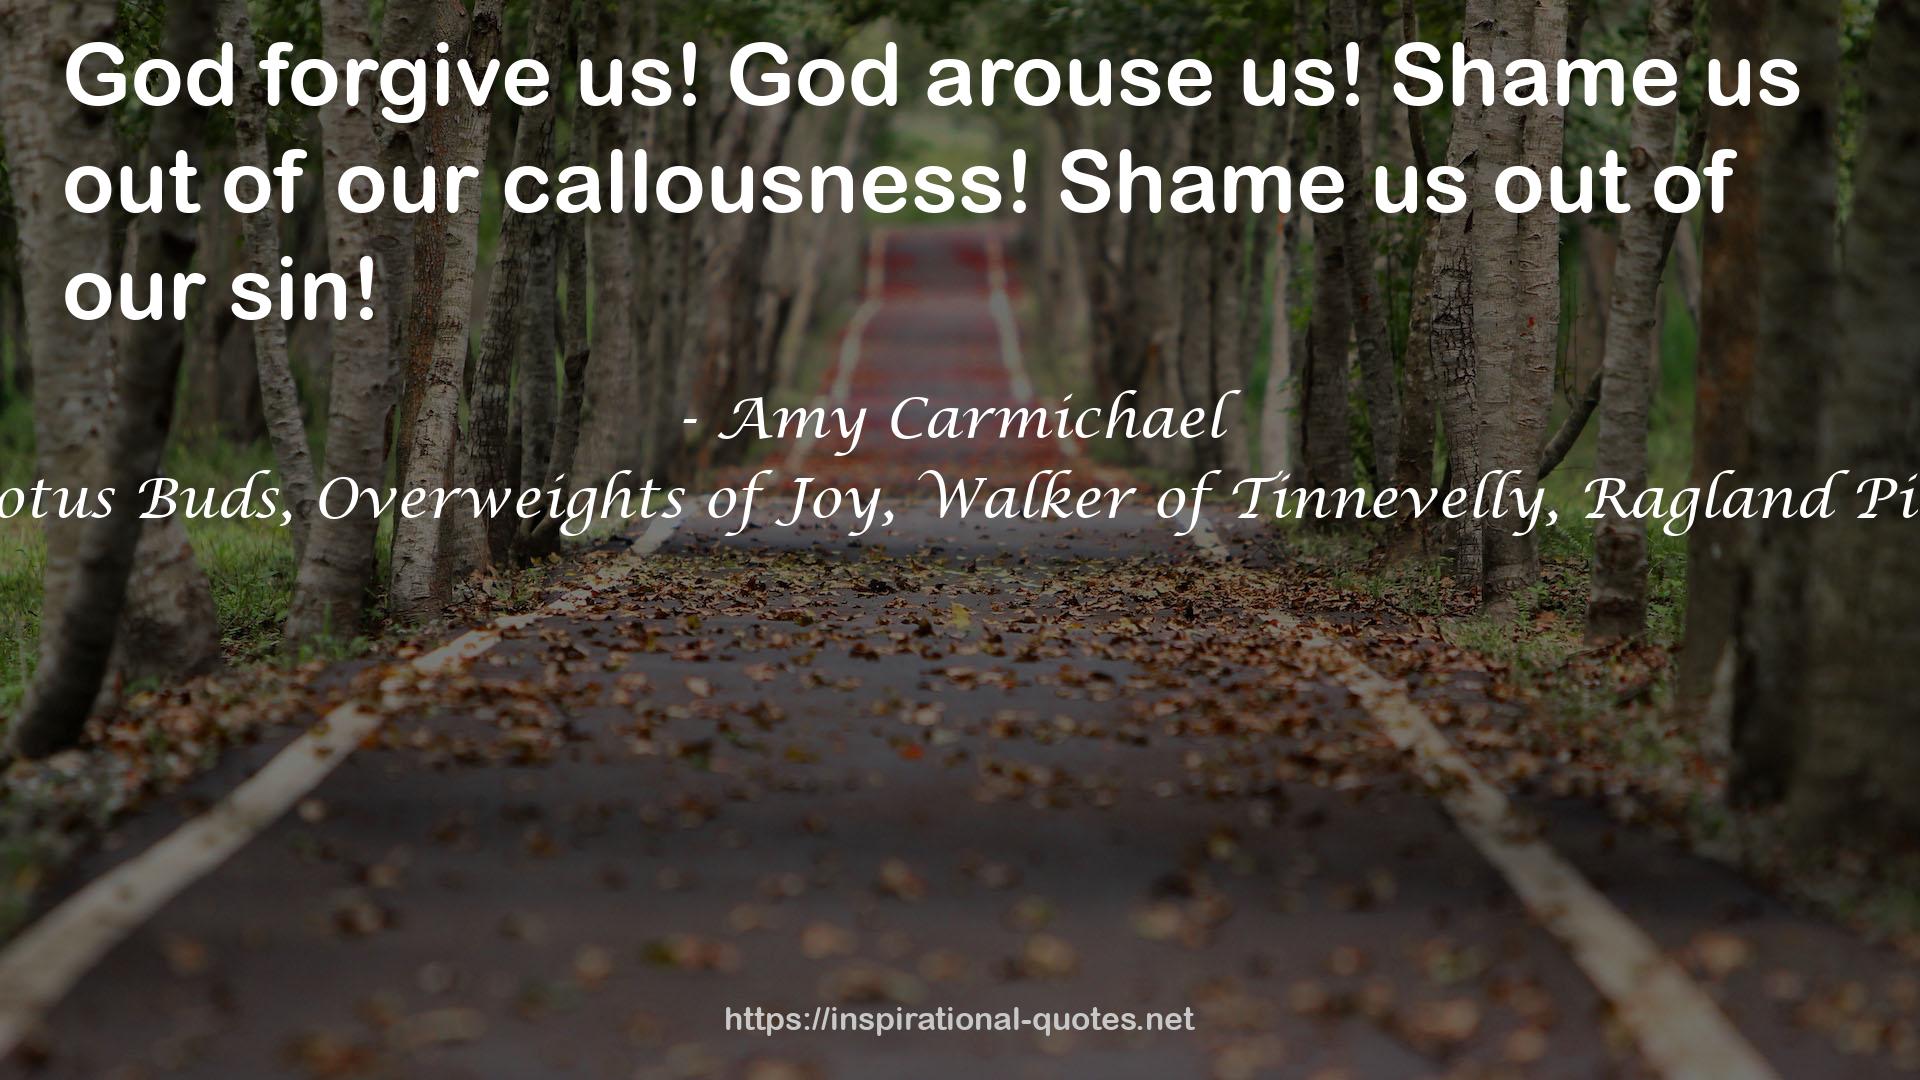 Amy Carmichael 8-in-1 (Illustrated). Things as they Are, Lotus Buds, Overweights of Joy, Walker of Tinnevelly, Ragland Pioneer, Ponnamal, Continuation of a Story, From the Fight QUOTES